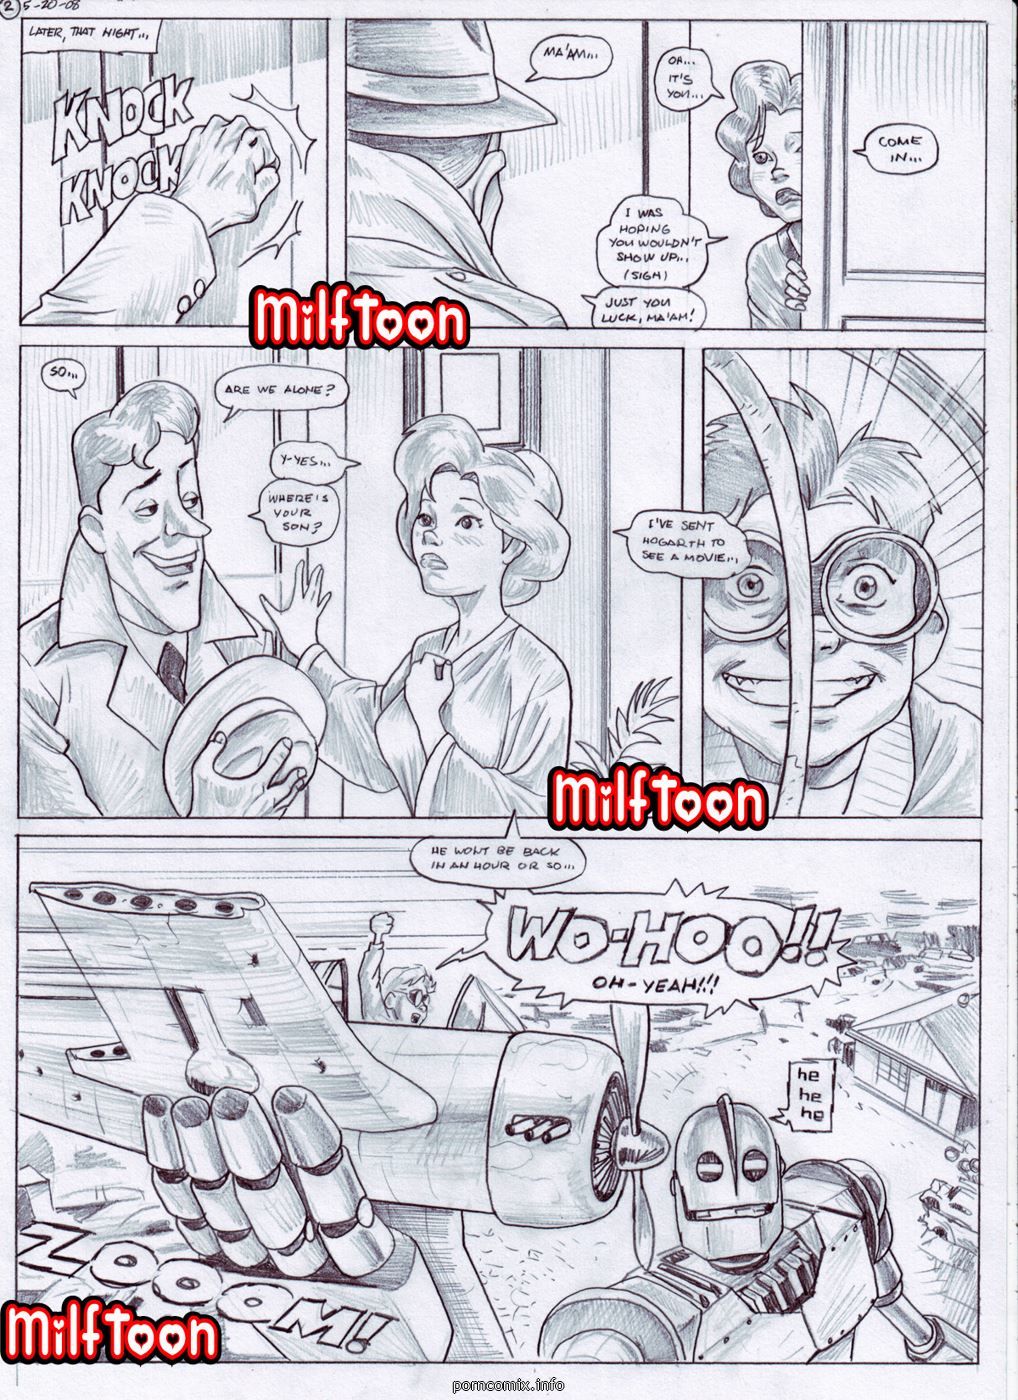 Milftoon - Iron Giant 2, Incest page 3